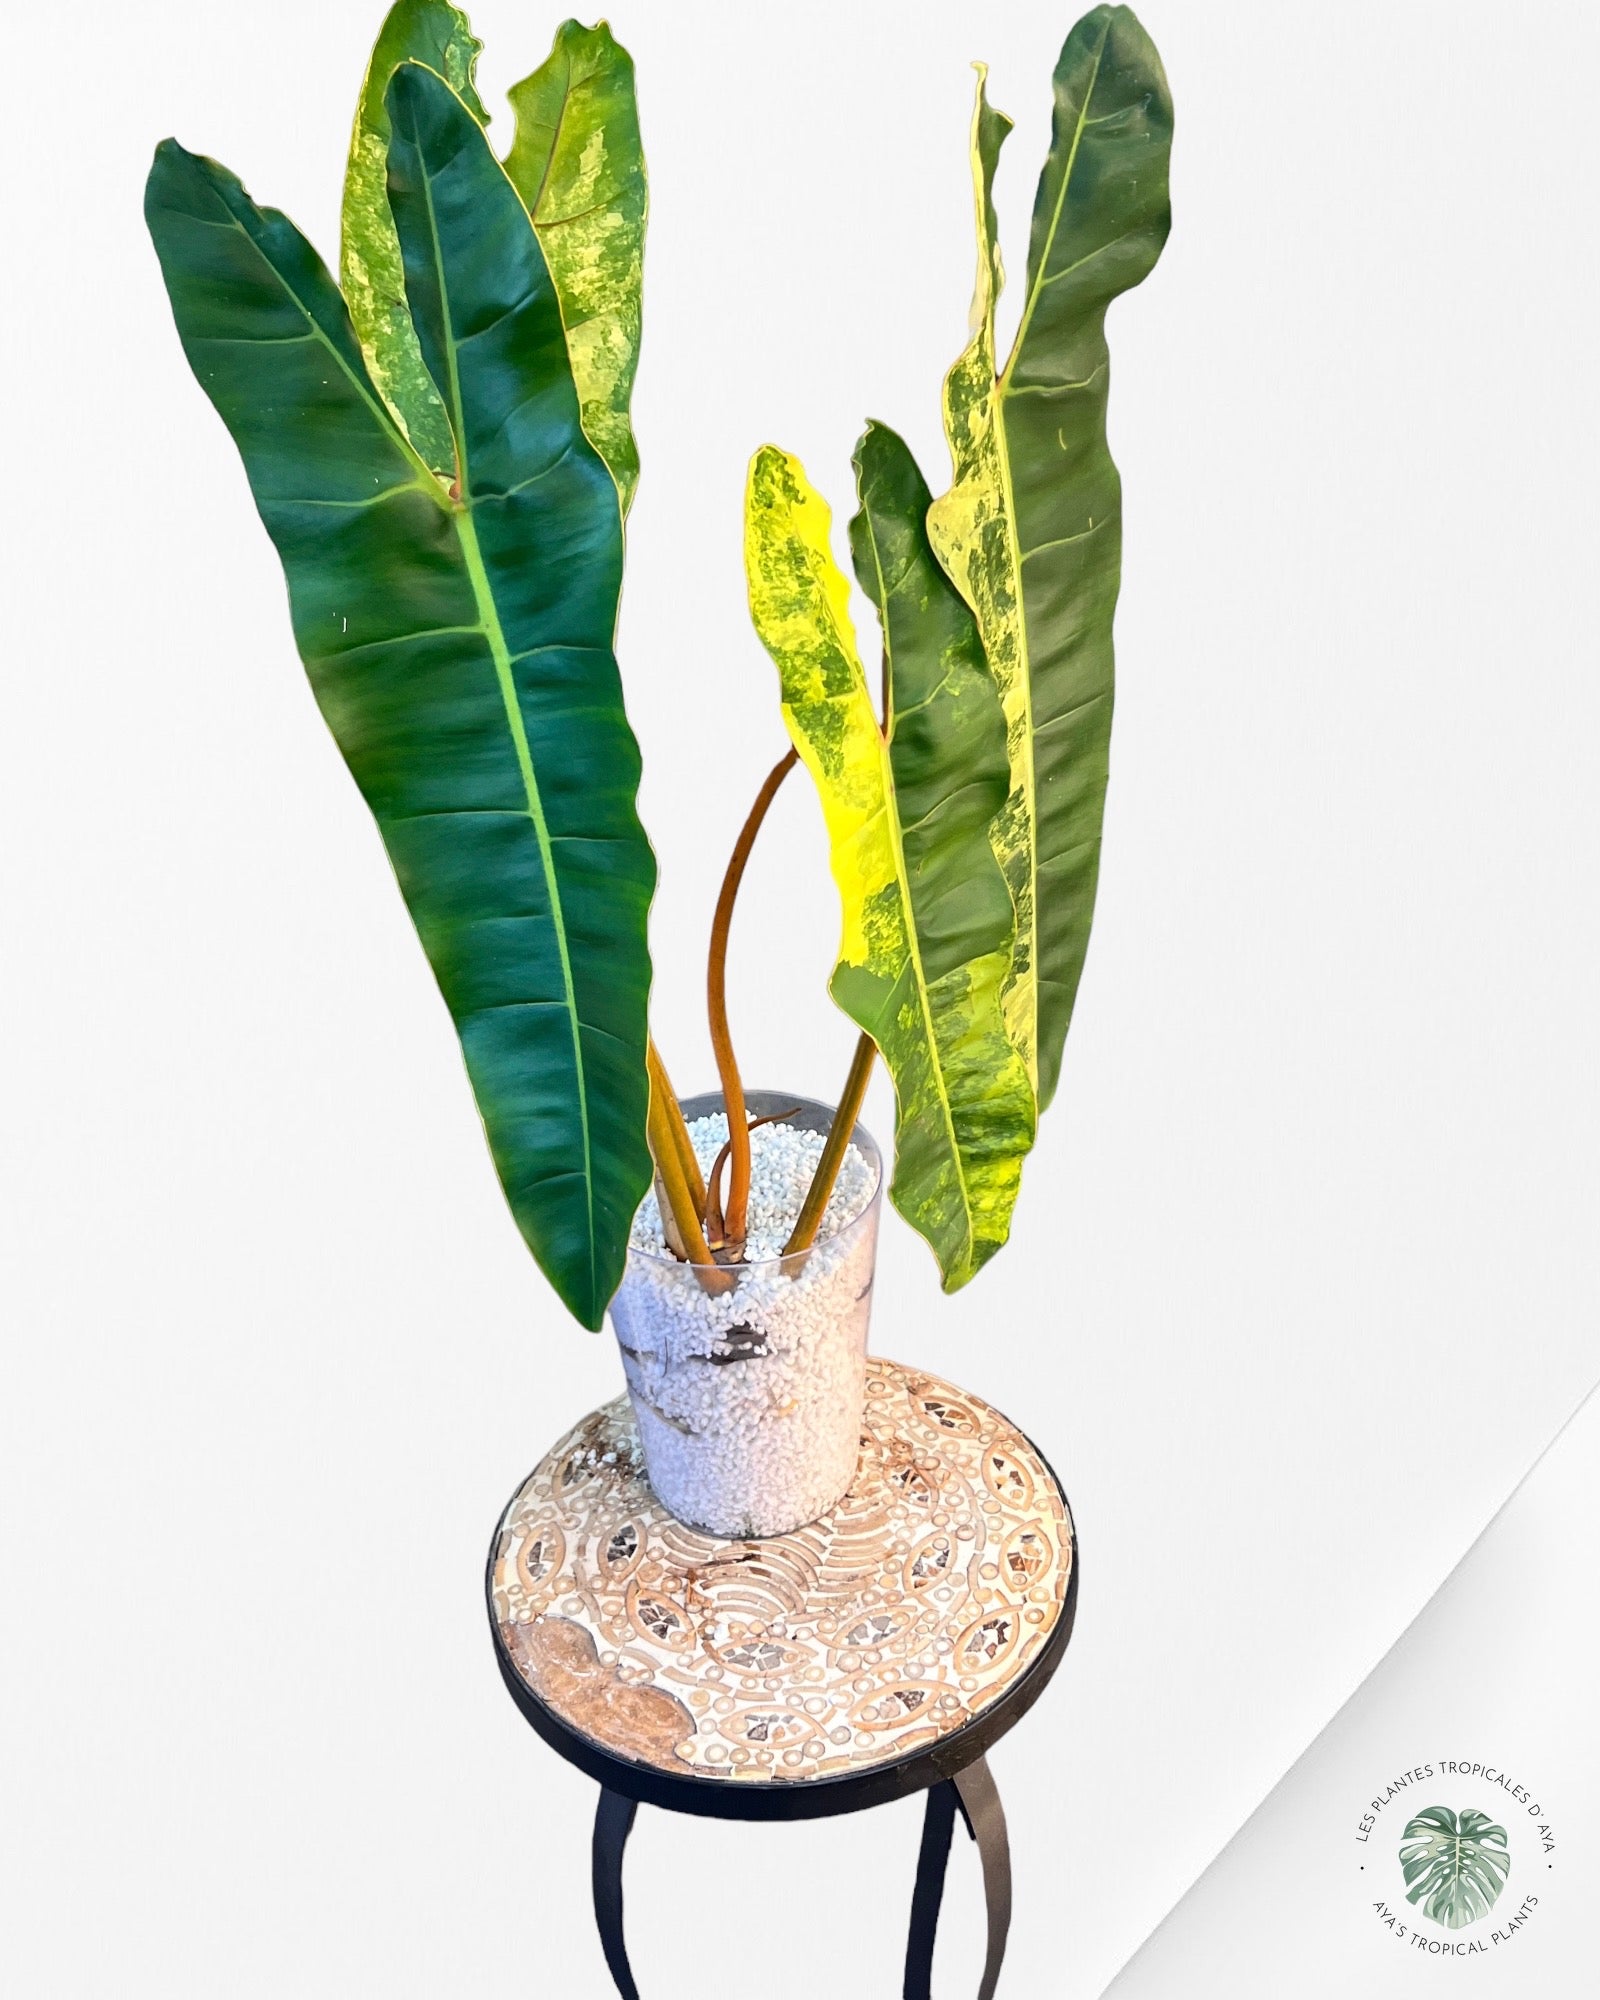 Philodendron billietiae variageted